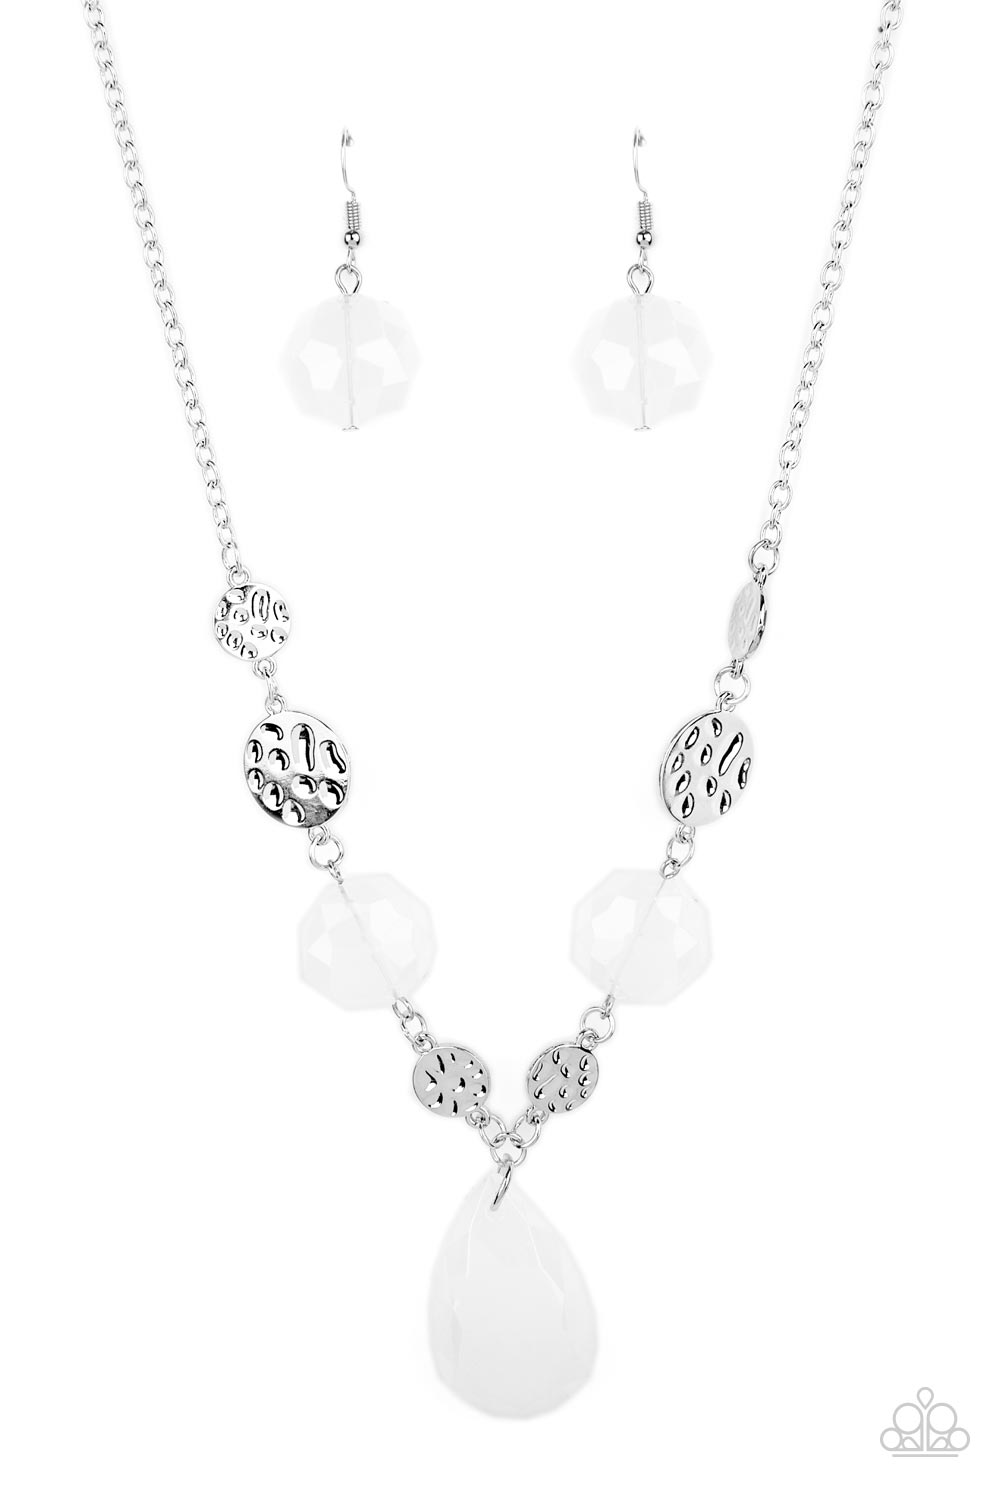 Paparazzi Accessories DEW What You Wanna DEW - White Necklaces - Lady T Accessories